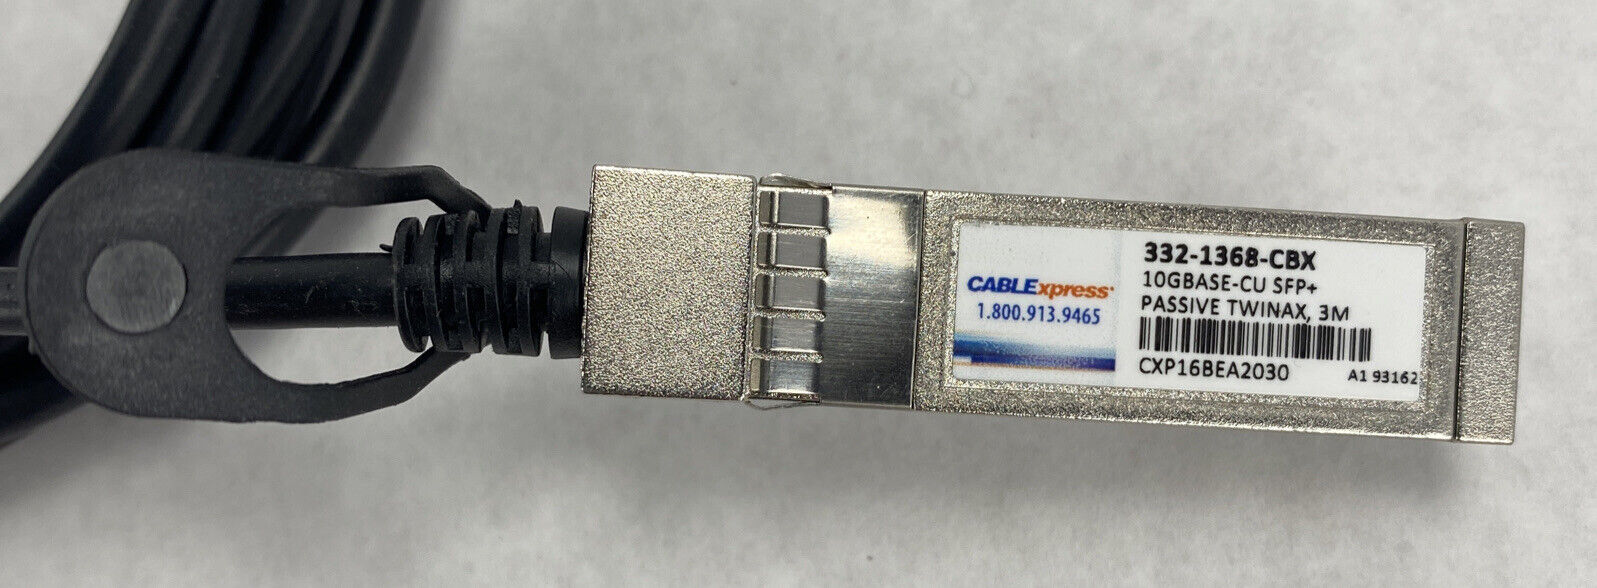 CableExpress 332-1368-CBX 10GBASE-CU SFP+ Passive Twinax cable 3m